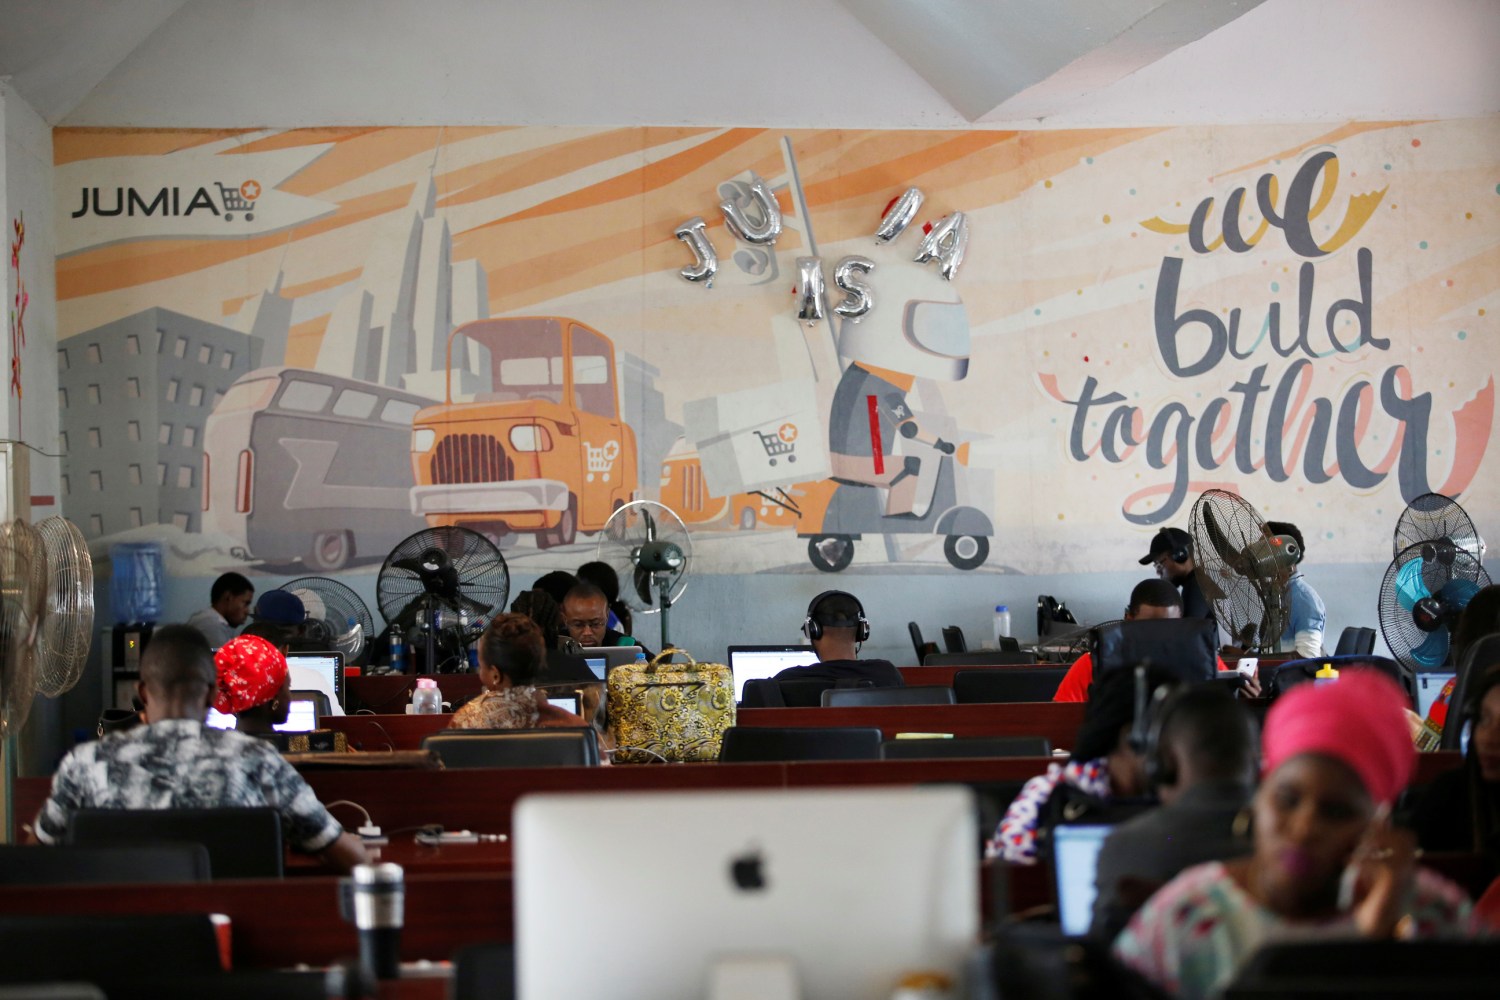 People work on computers at the offices of online retailer Jumia in Nigeria's commercial capital, Lagos.